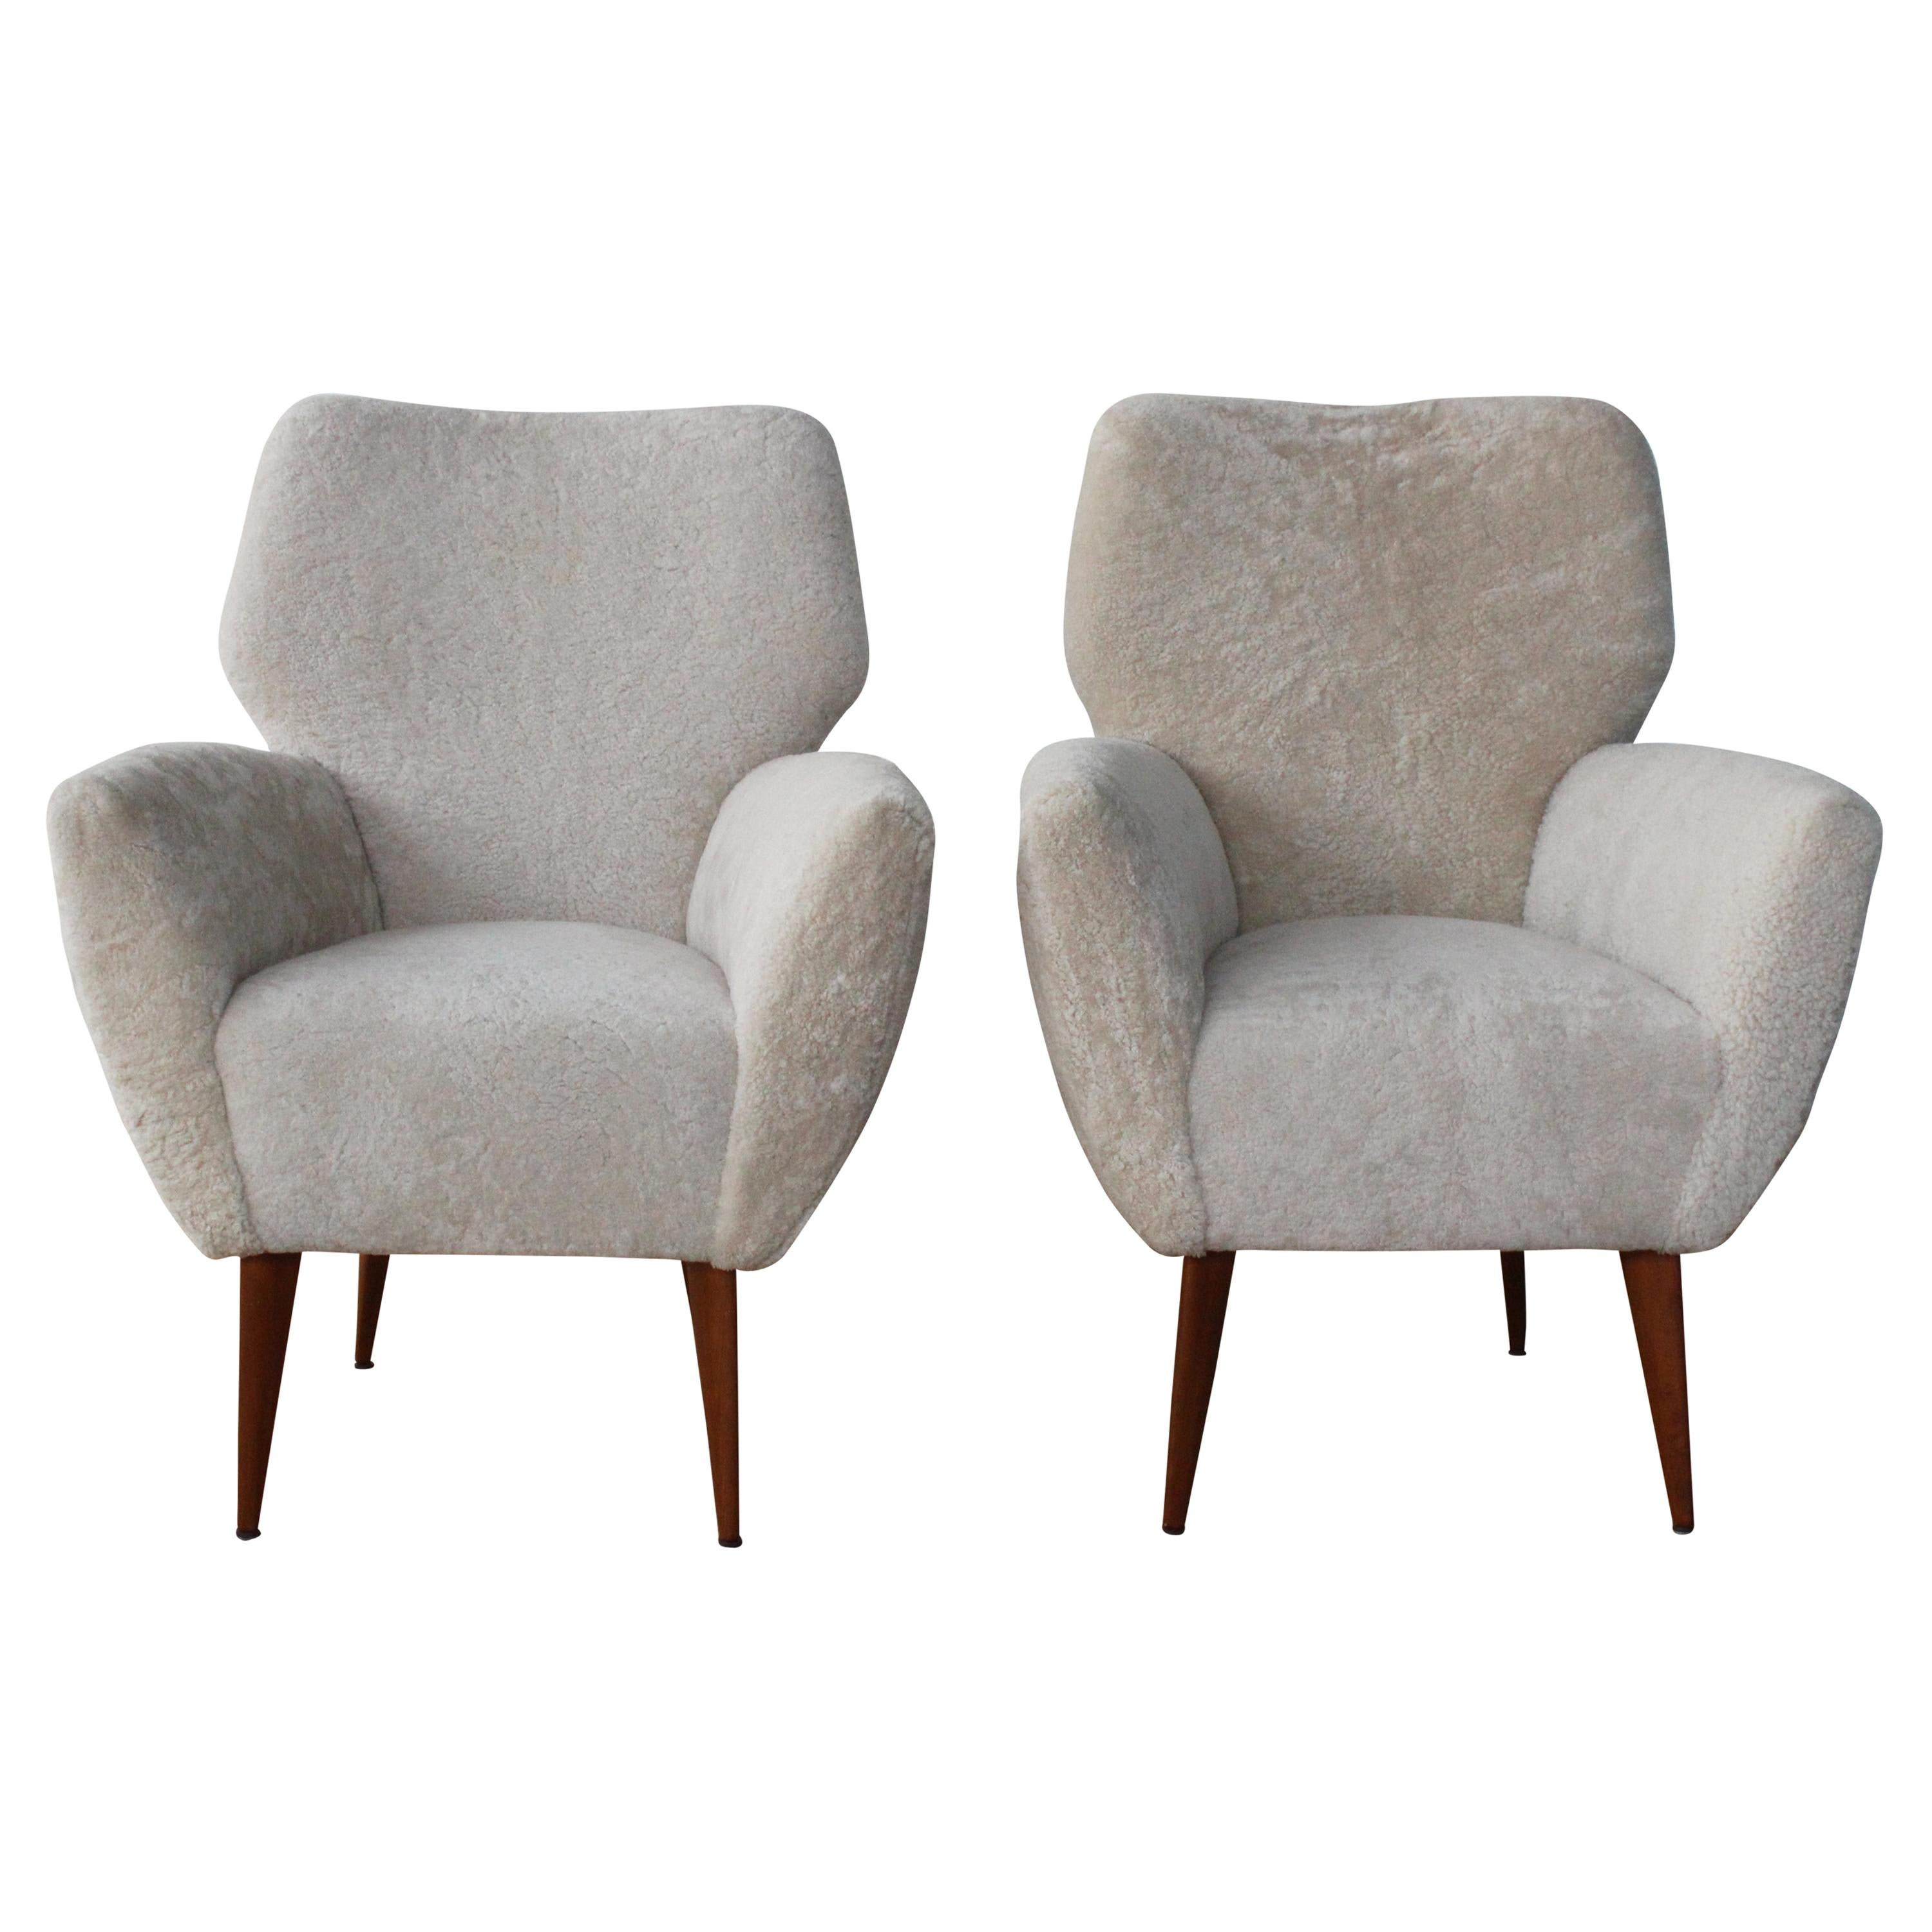 Pair of Shearling Armchairs Attributed to Gio Ponti, Italy, 1950s